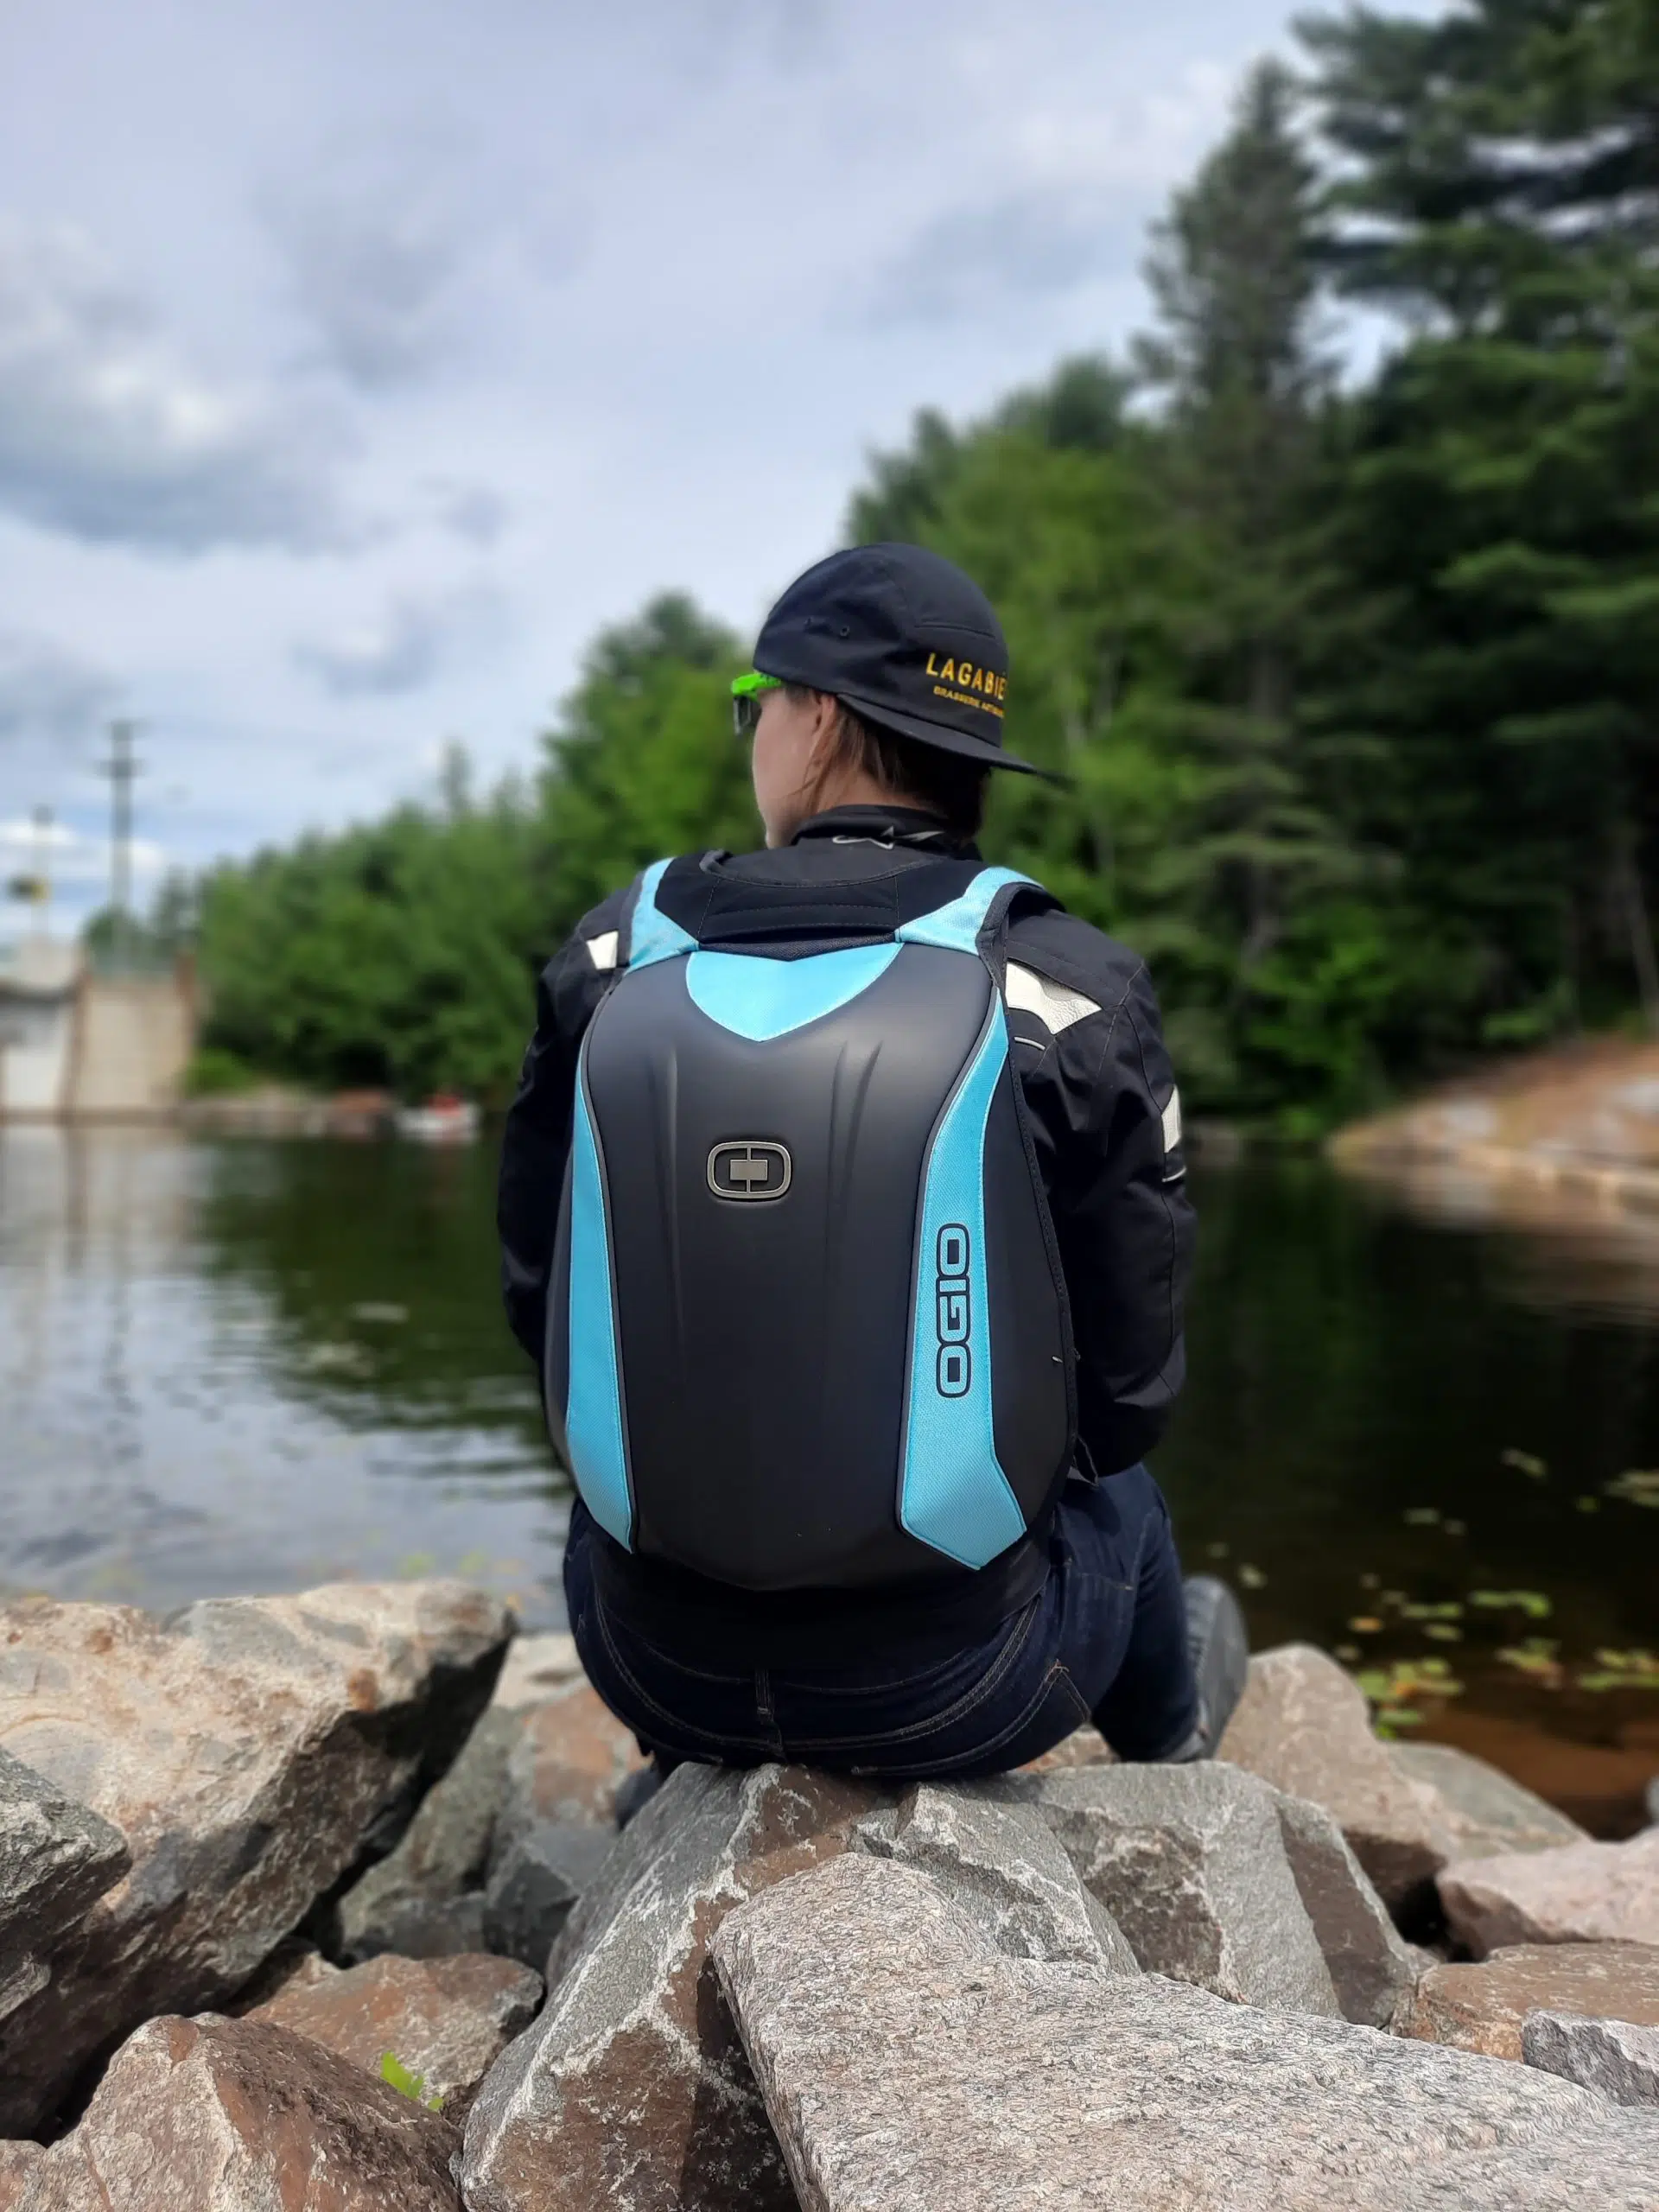 Testing the OGIO Mach 3S LE backpack: a versatile bag!